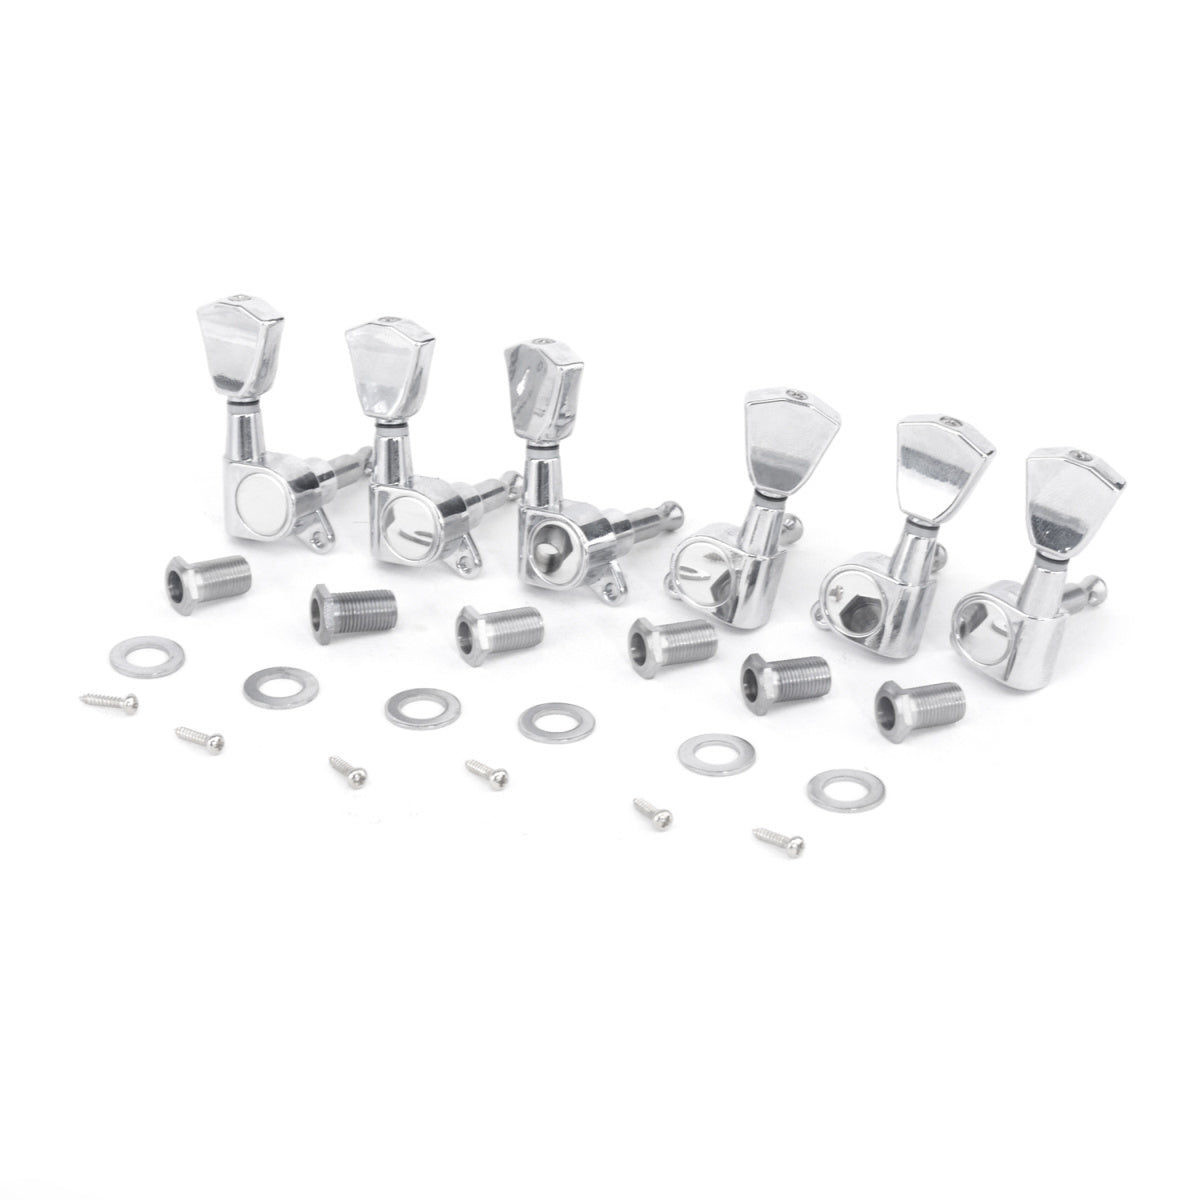 Musiclily Pro 3x3 Sealed Guitar Tuners Tuning Pegs Keys Machine Heads Set for Les Paul Style Guitar, Tulip Button Chrome